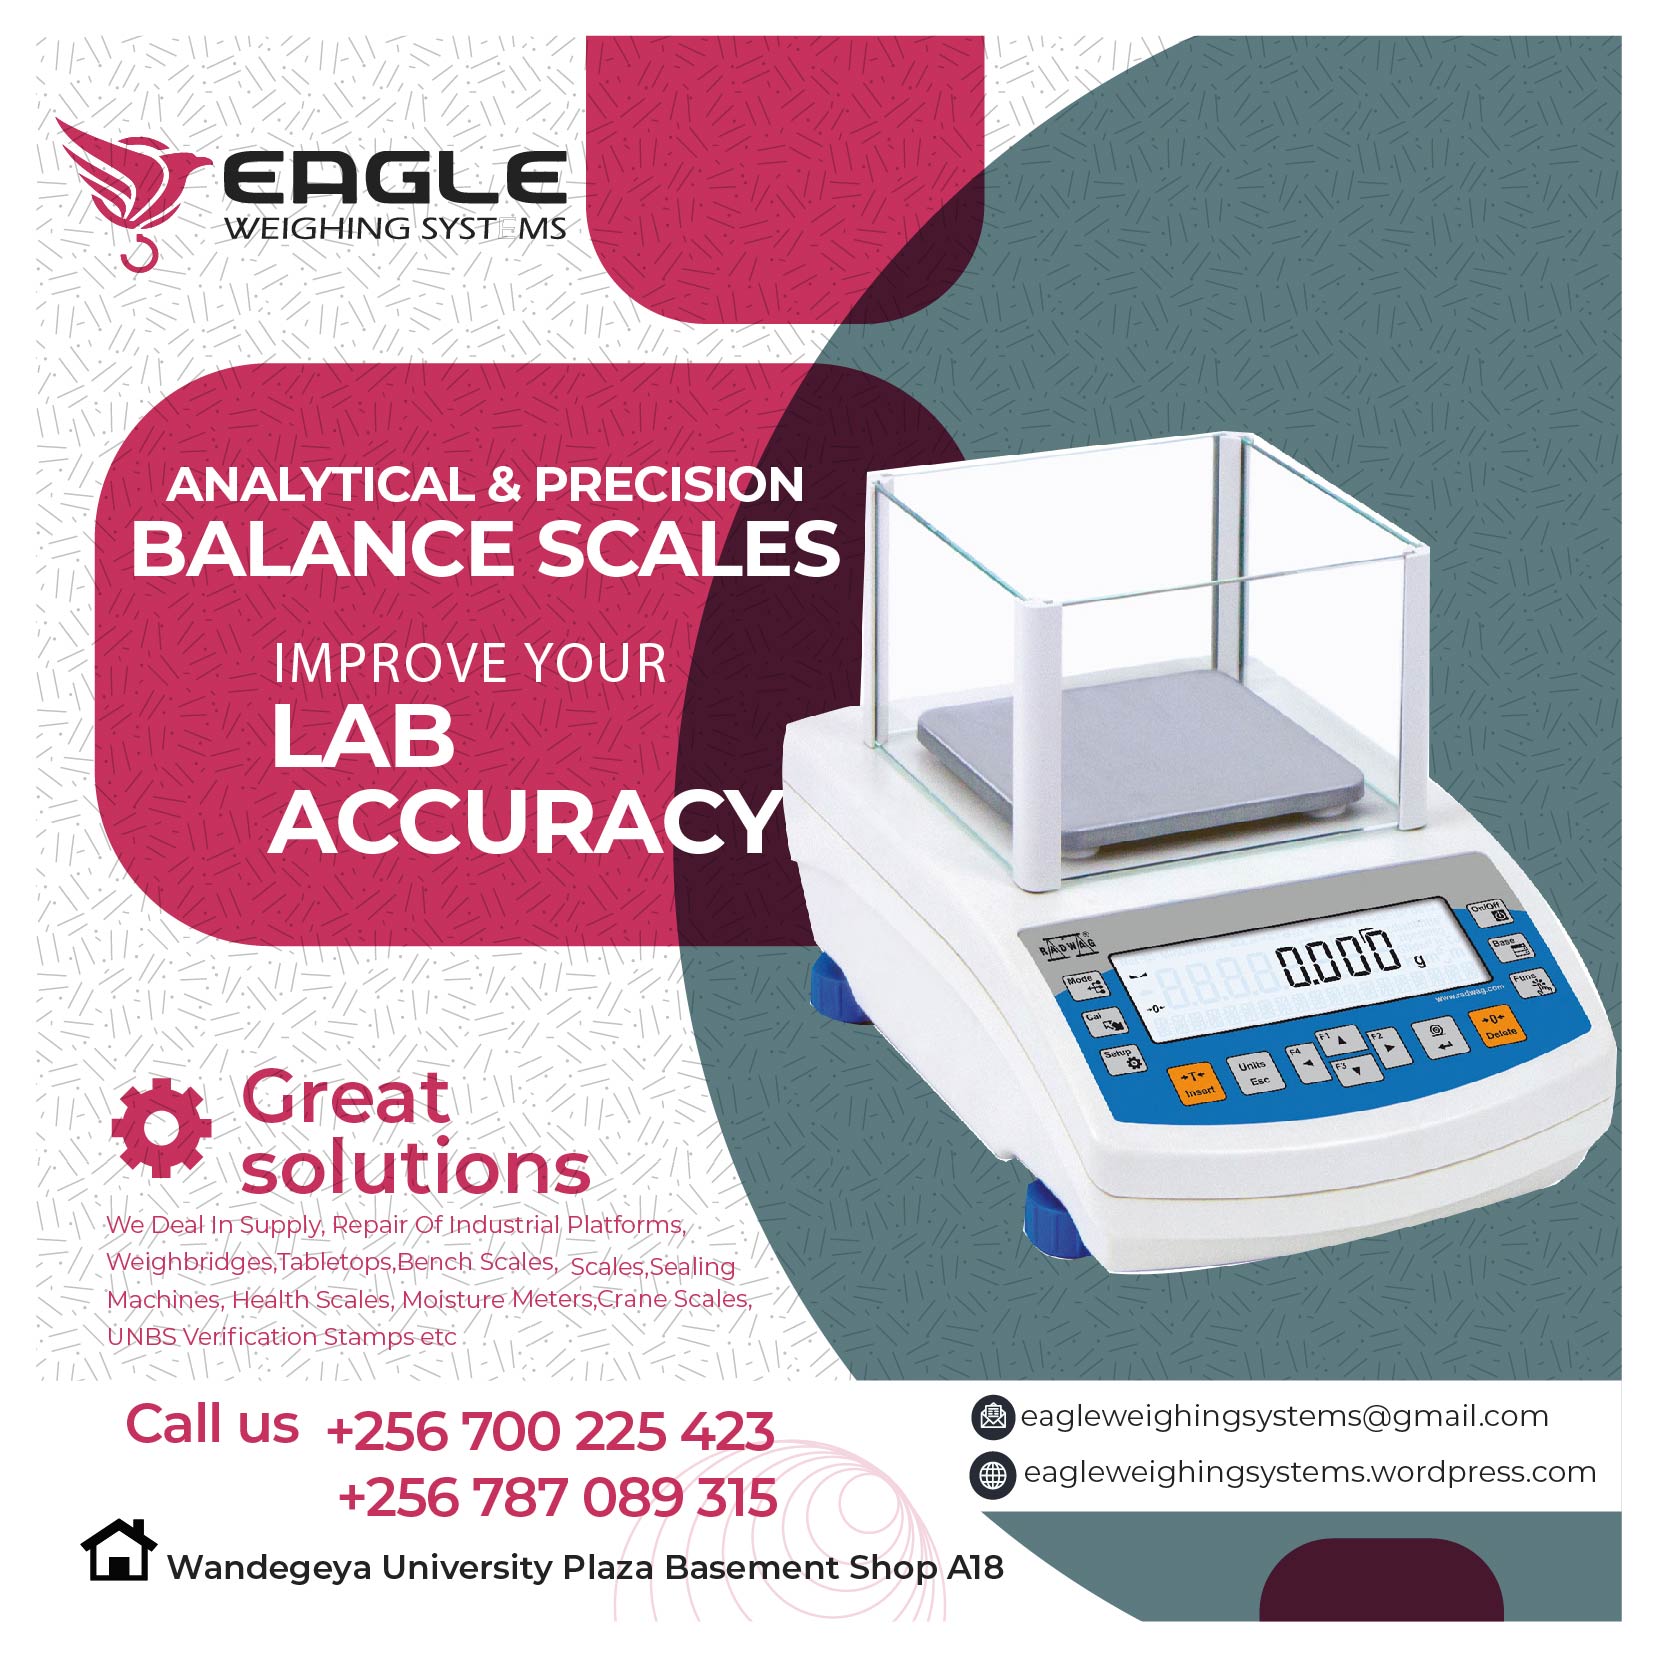 Lab electronic weighing balance scales, Kampala Central Division, Central, Uganda